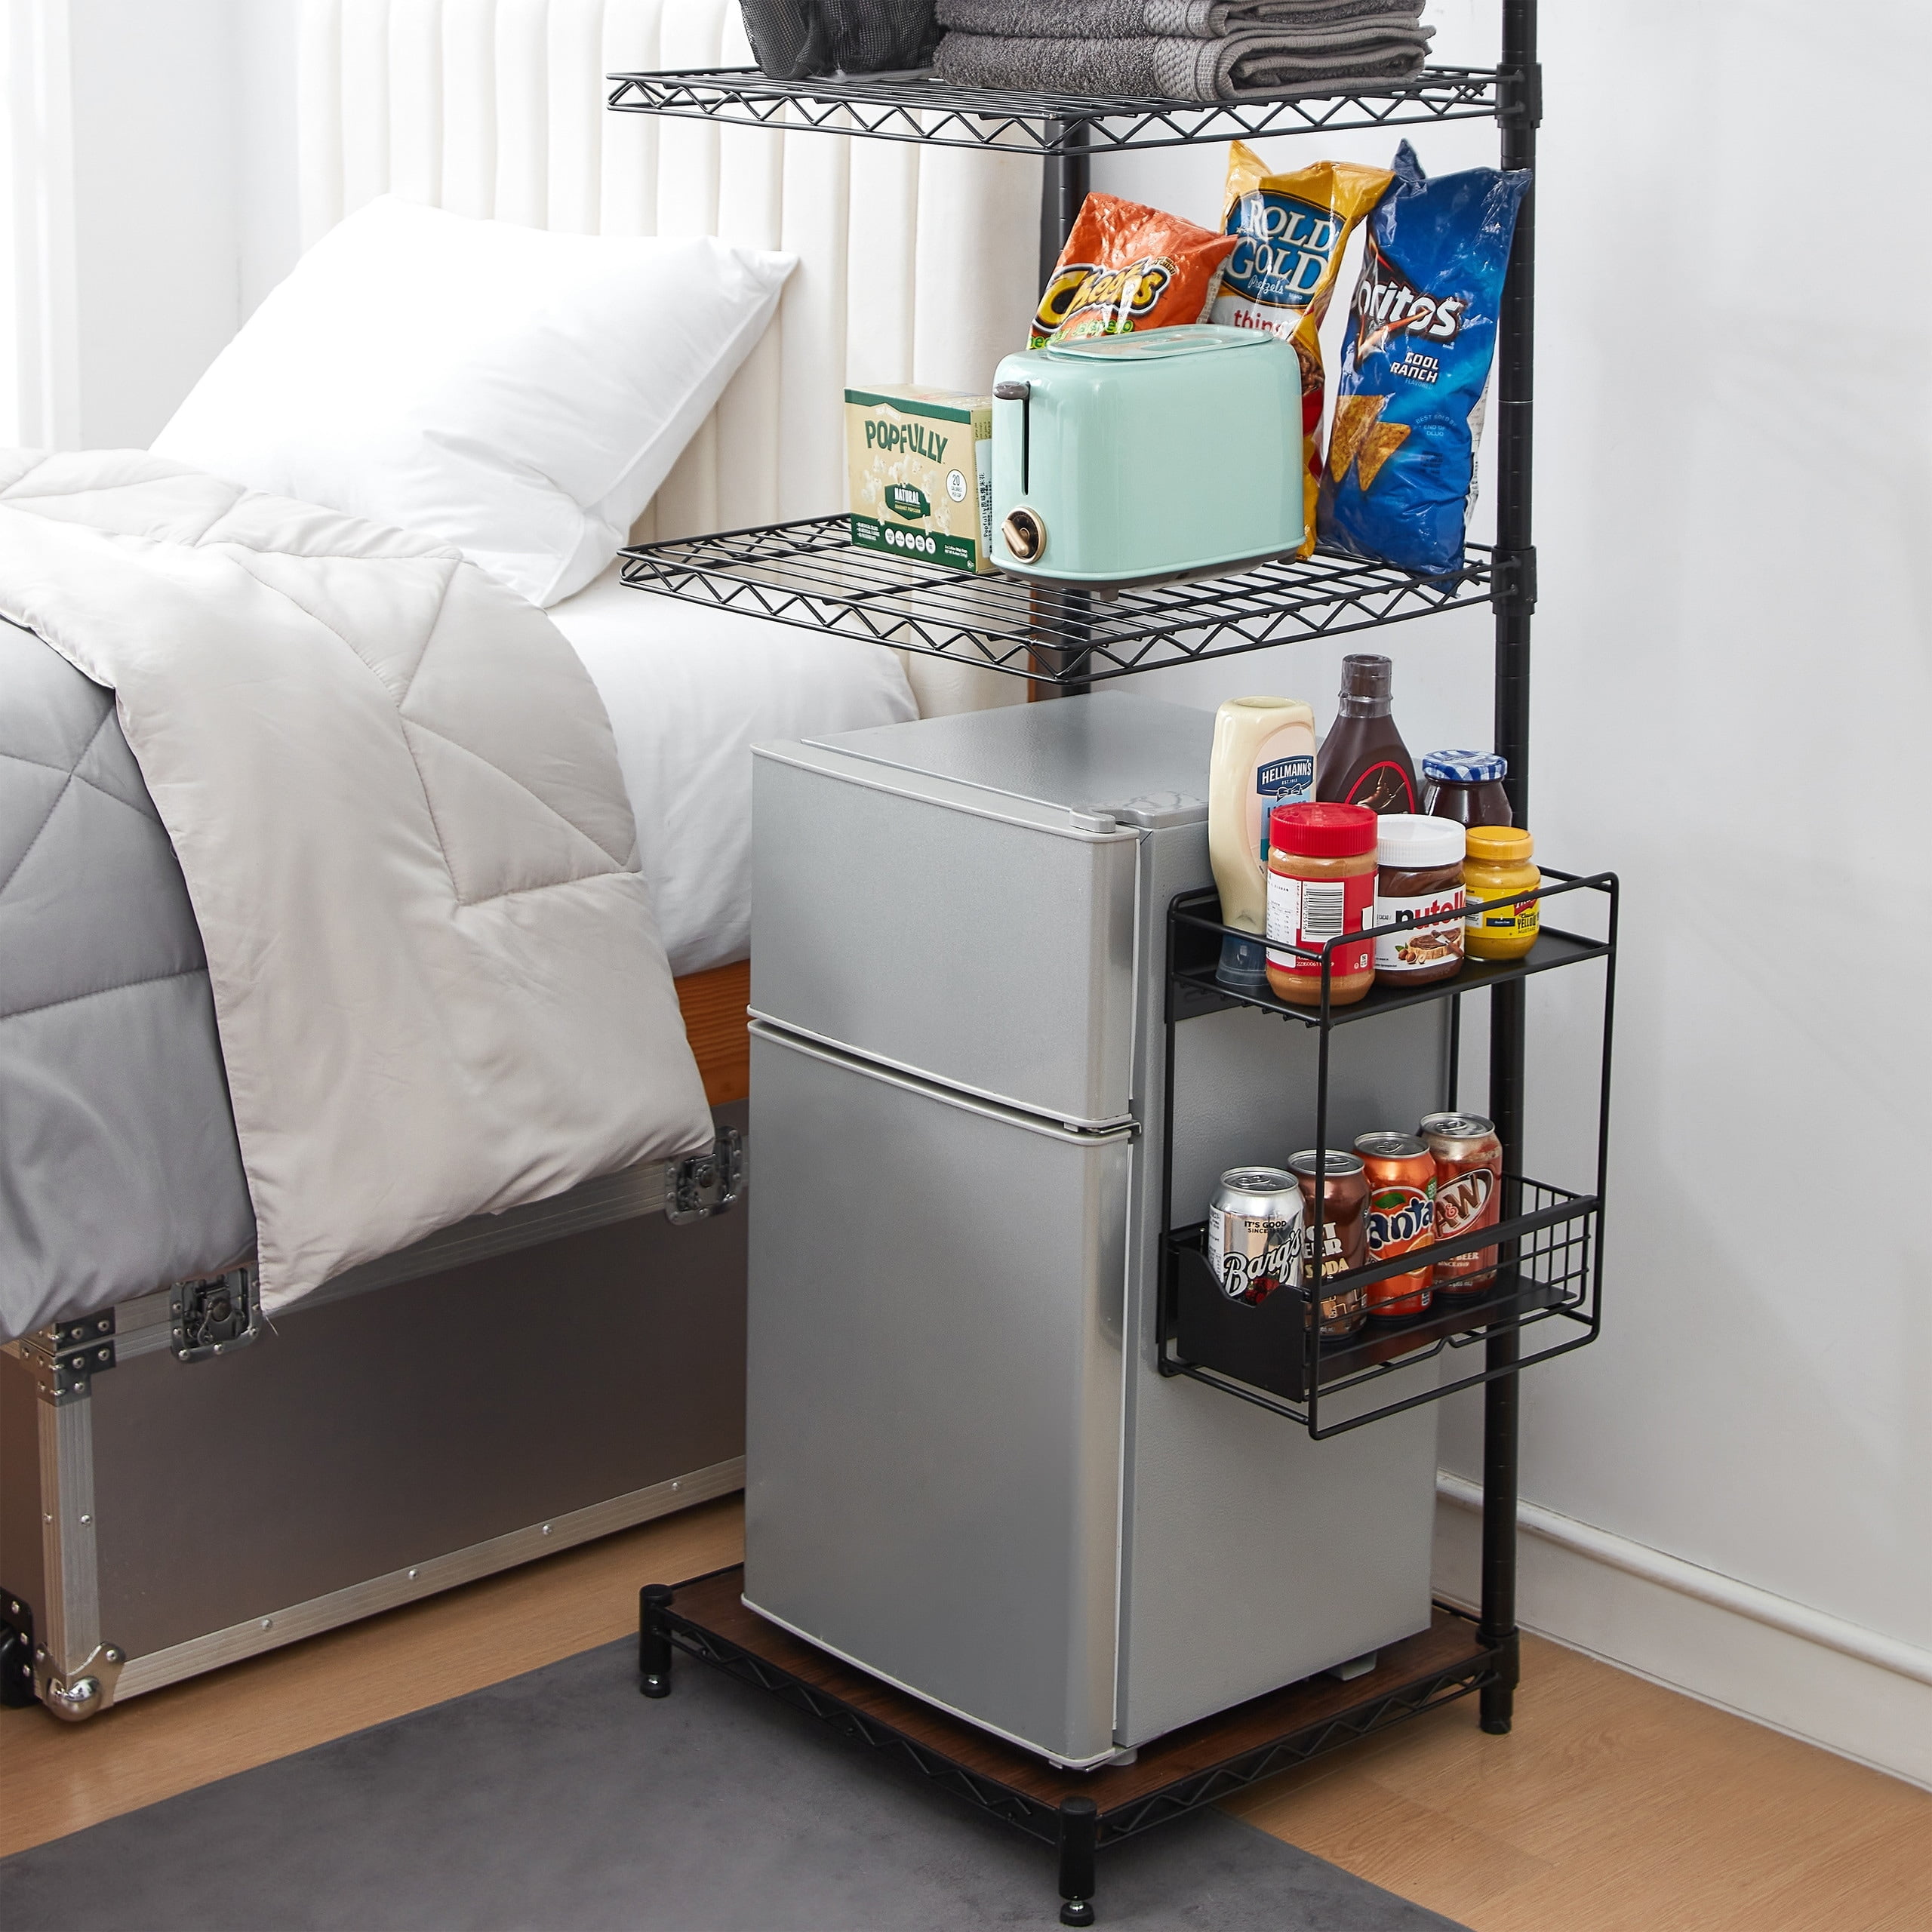 THE FRIDGE STAND SUPREME - BLACK PIPE FRAME WITH BLACK DRAWERS